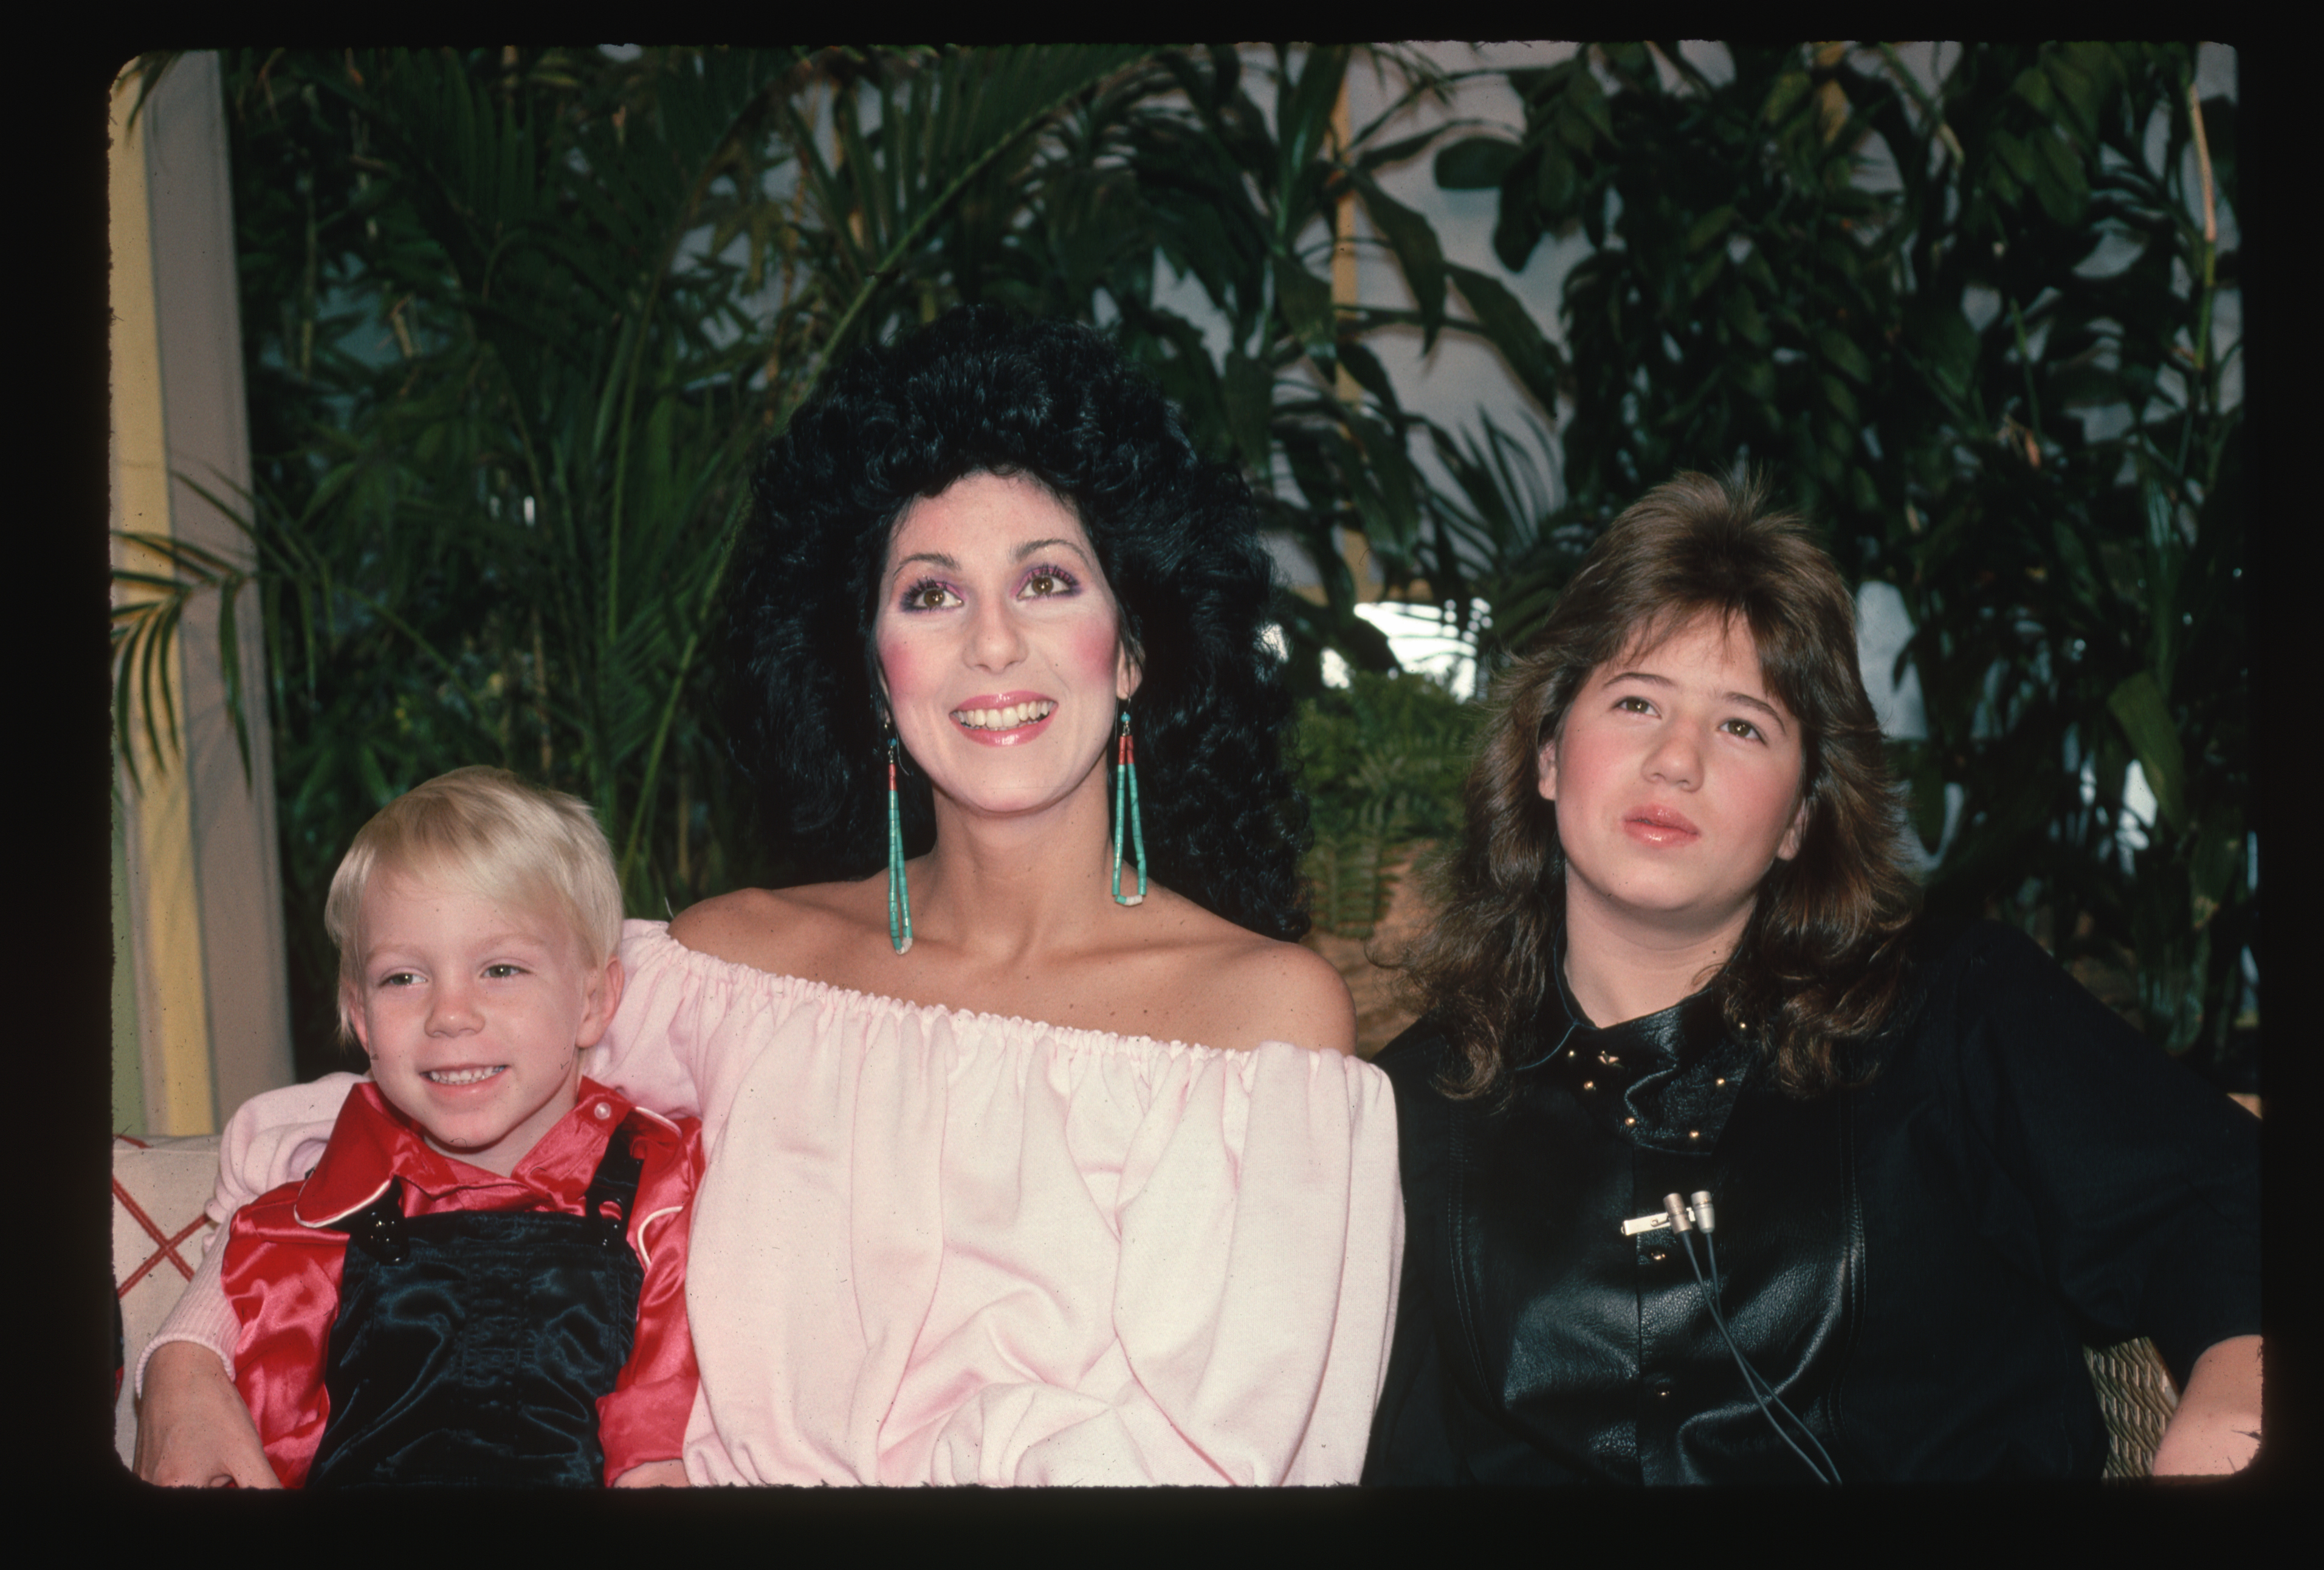 Elijah Blue Allman, Cher, and Chastity Bono in 1981. | Source: Getty Images